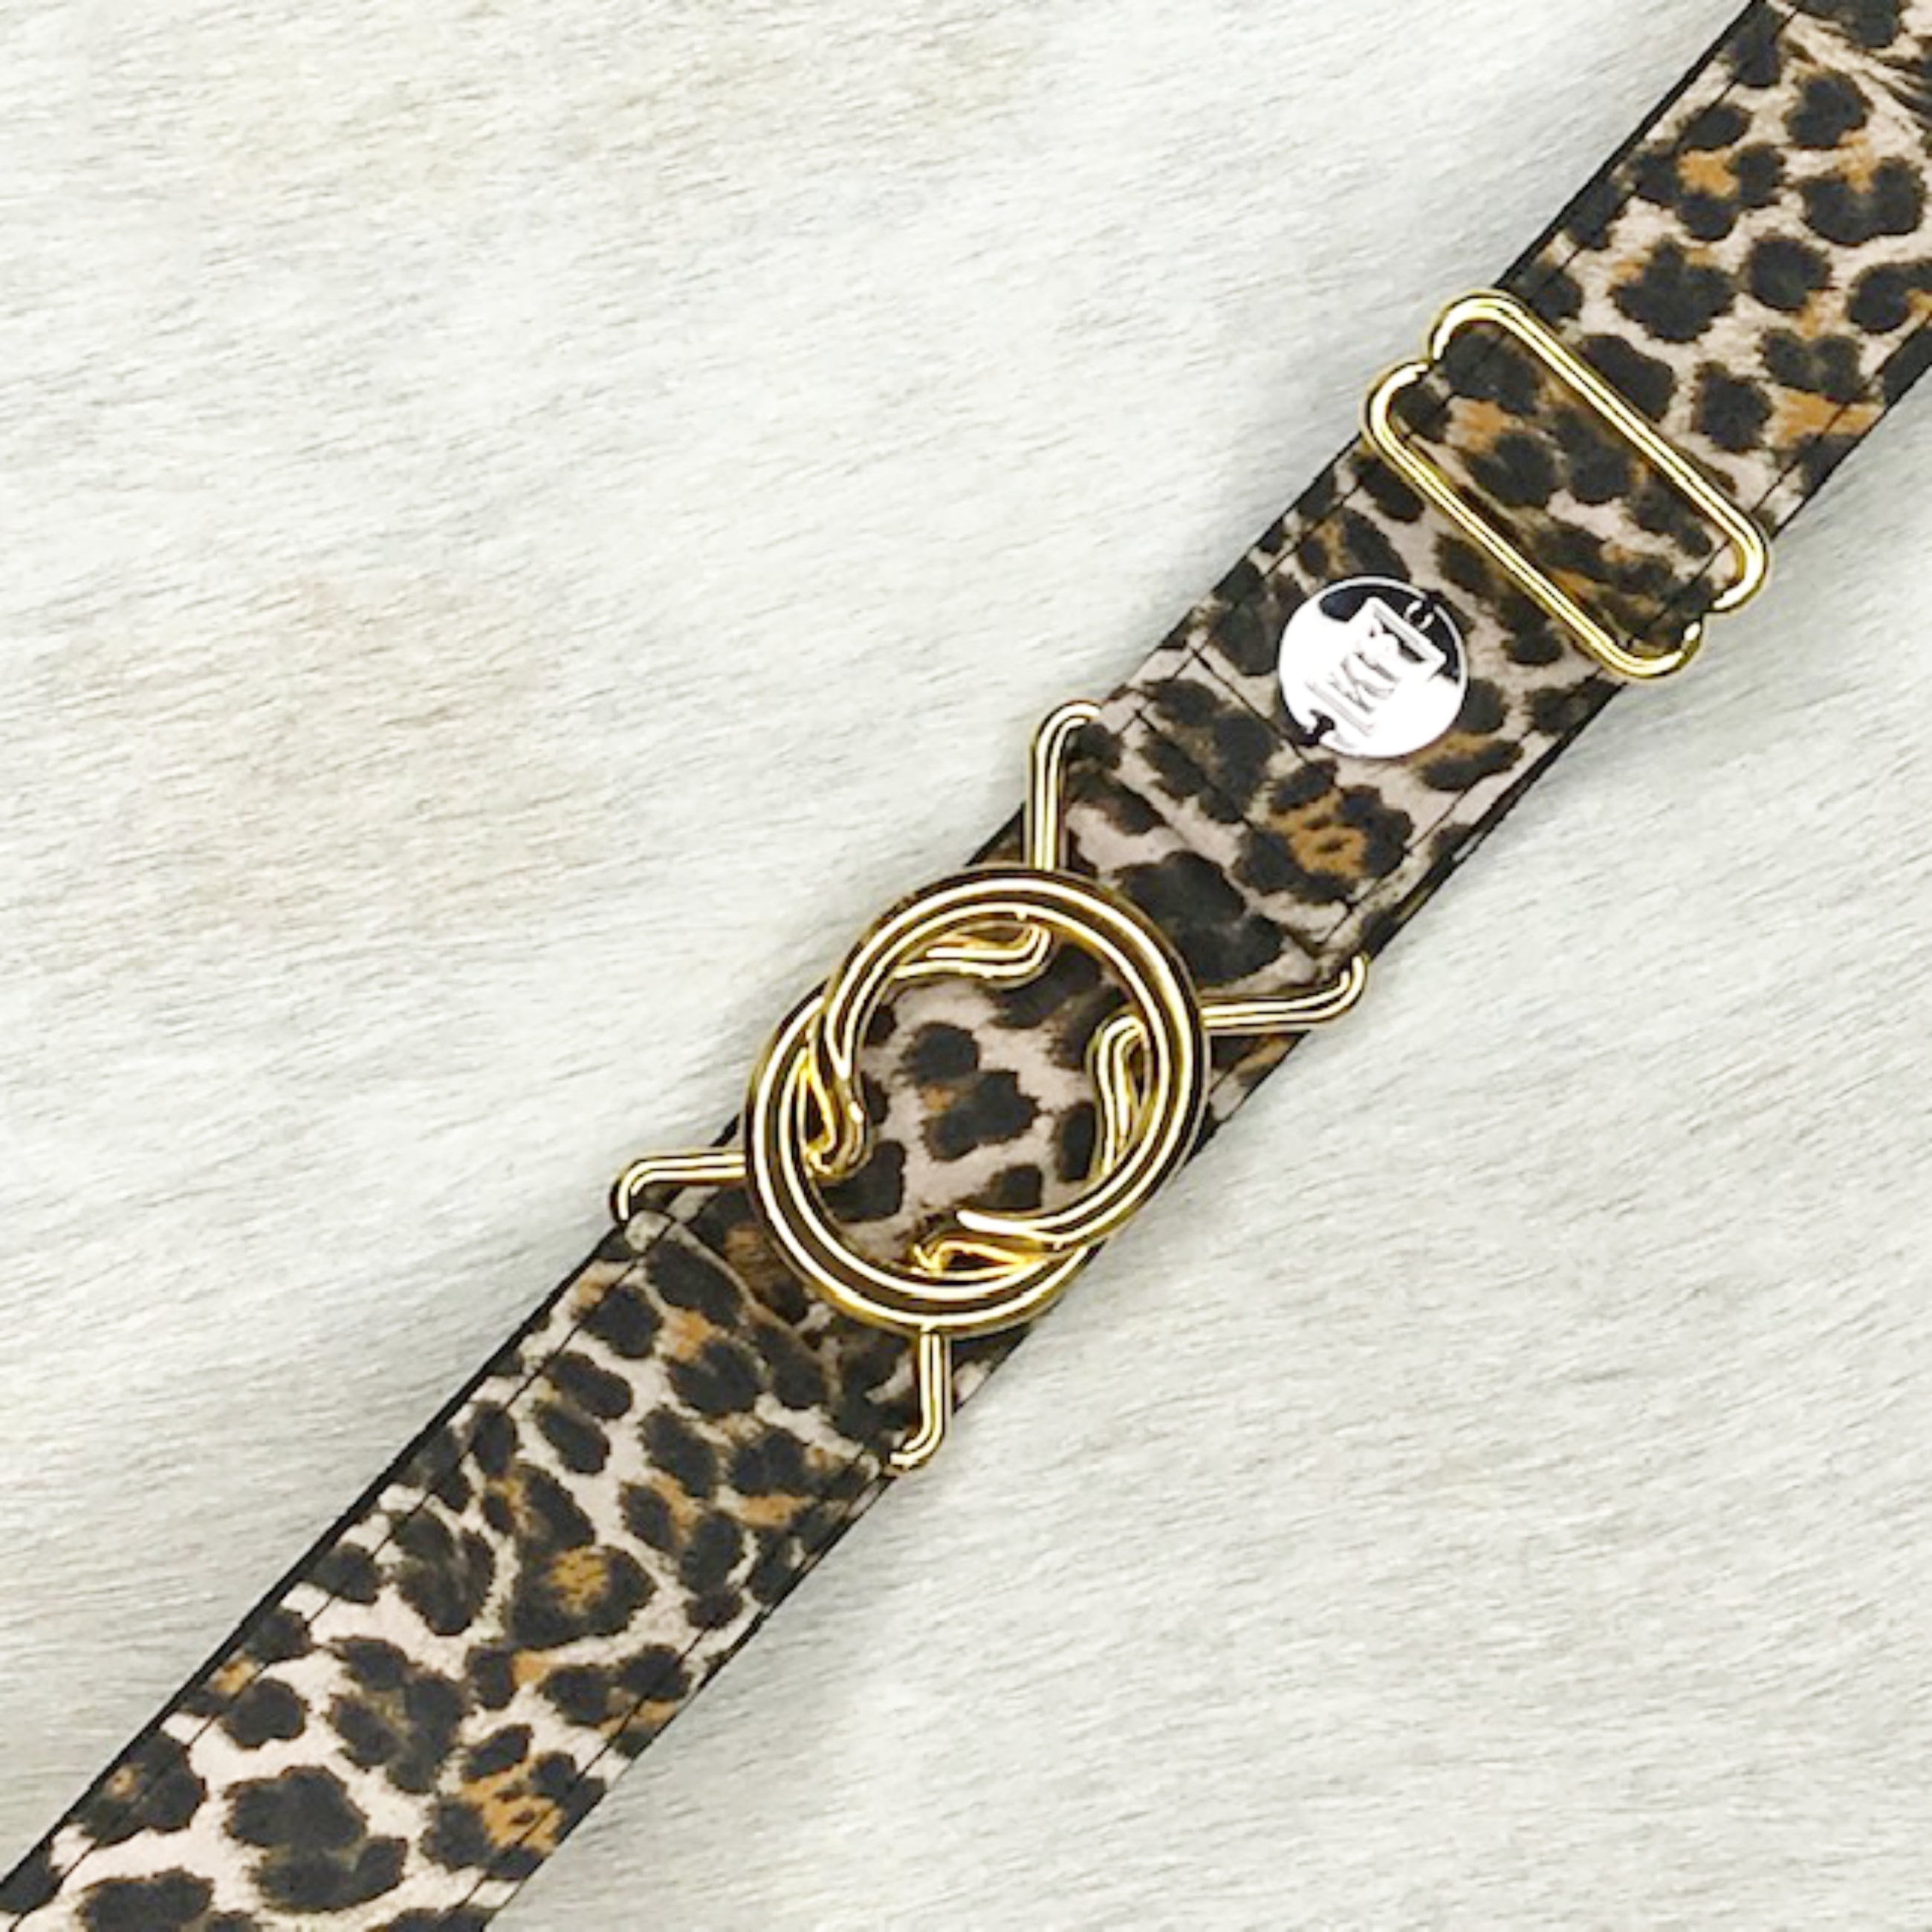 Cheetah belt with 1.5" gold interlocking buckle by KF Clothing